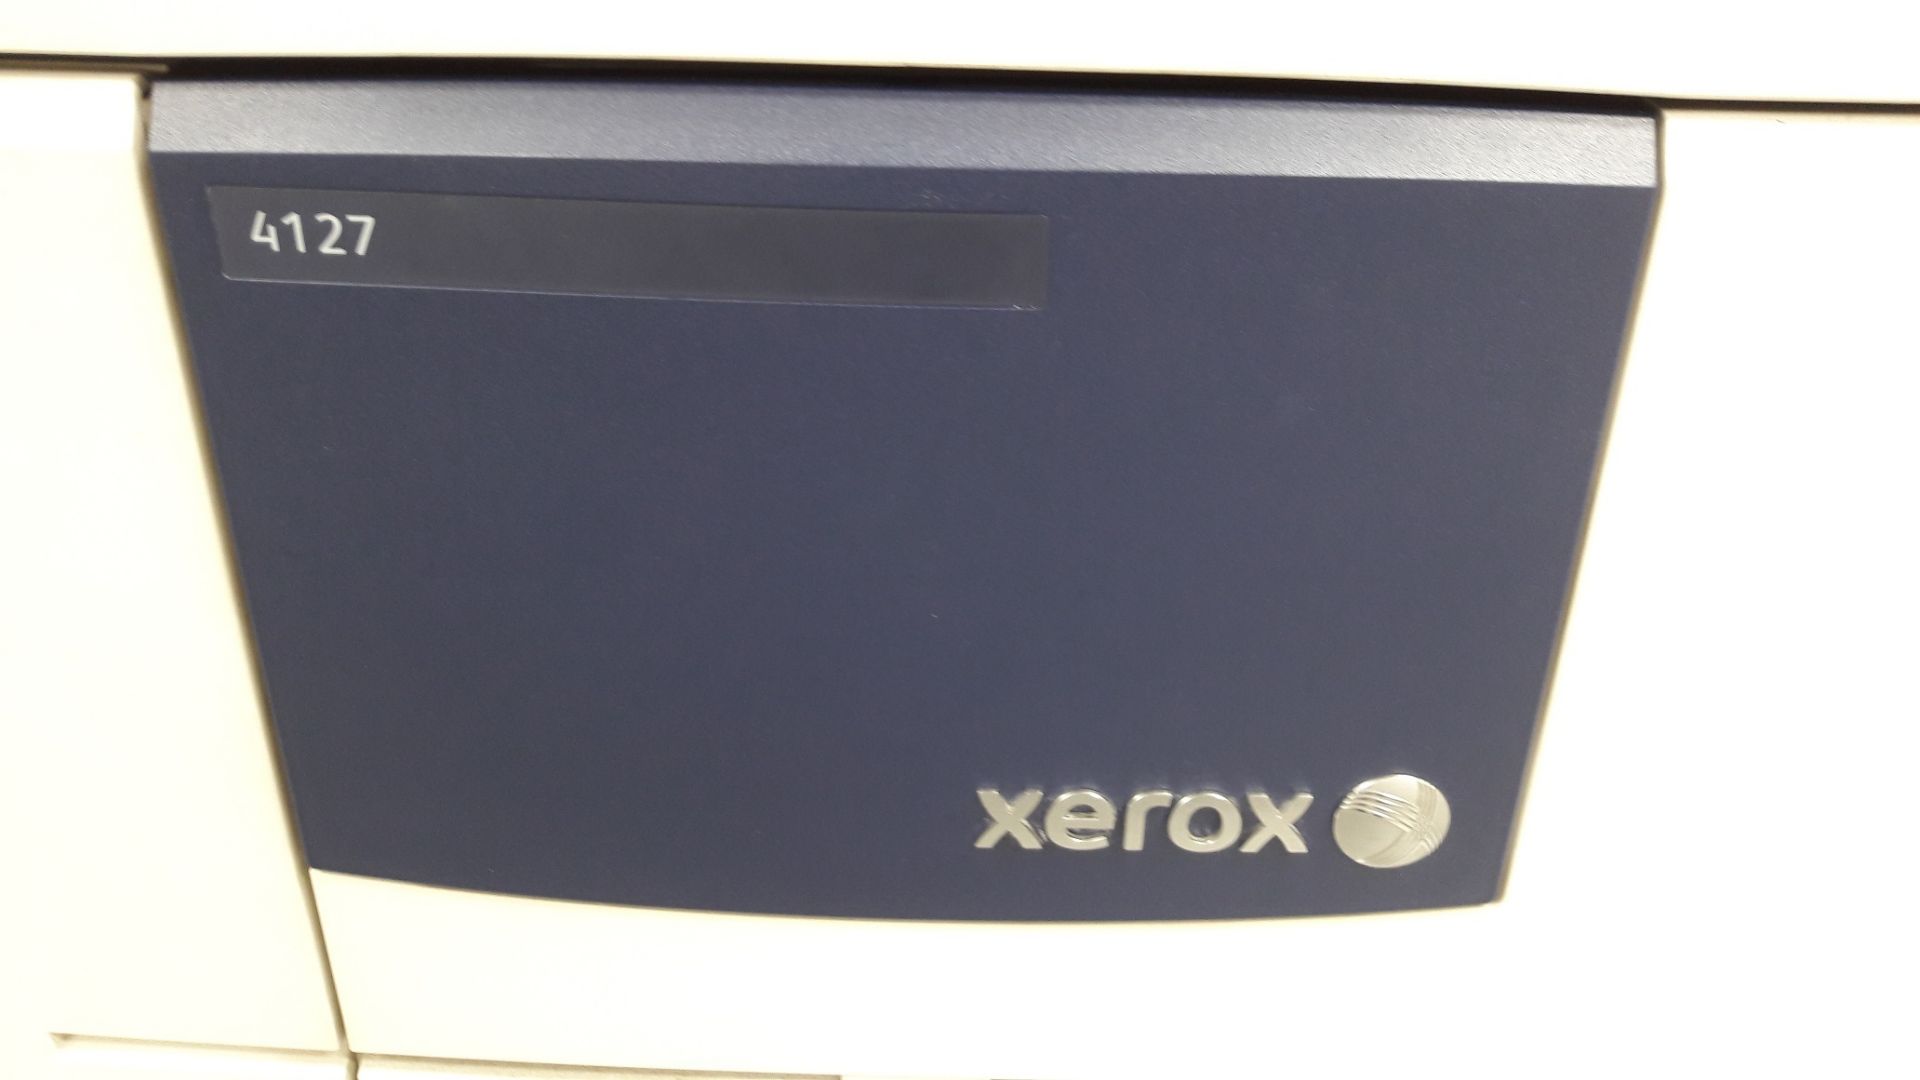 Xerox 4127 high speed copier printer with 7 drawers and 2 tray sorter - Image 6 of 6